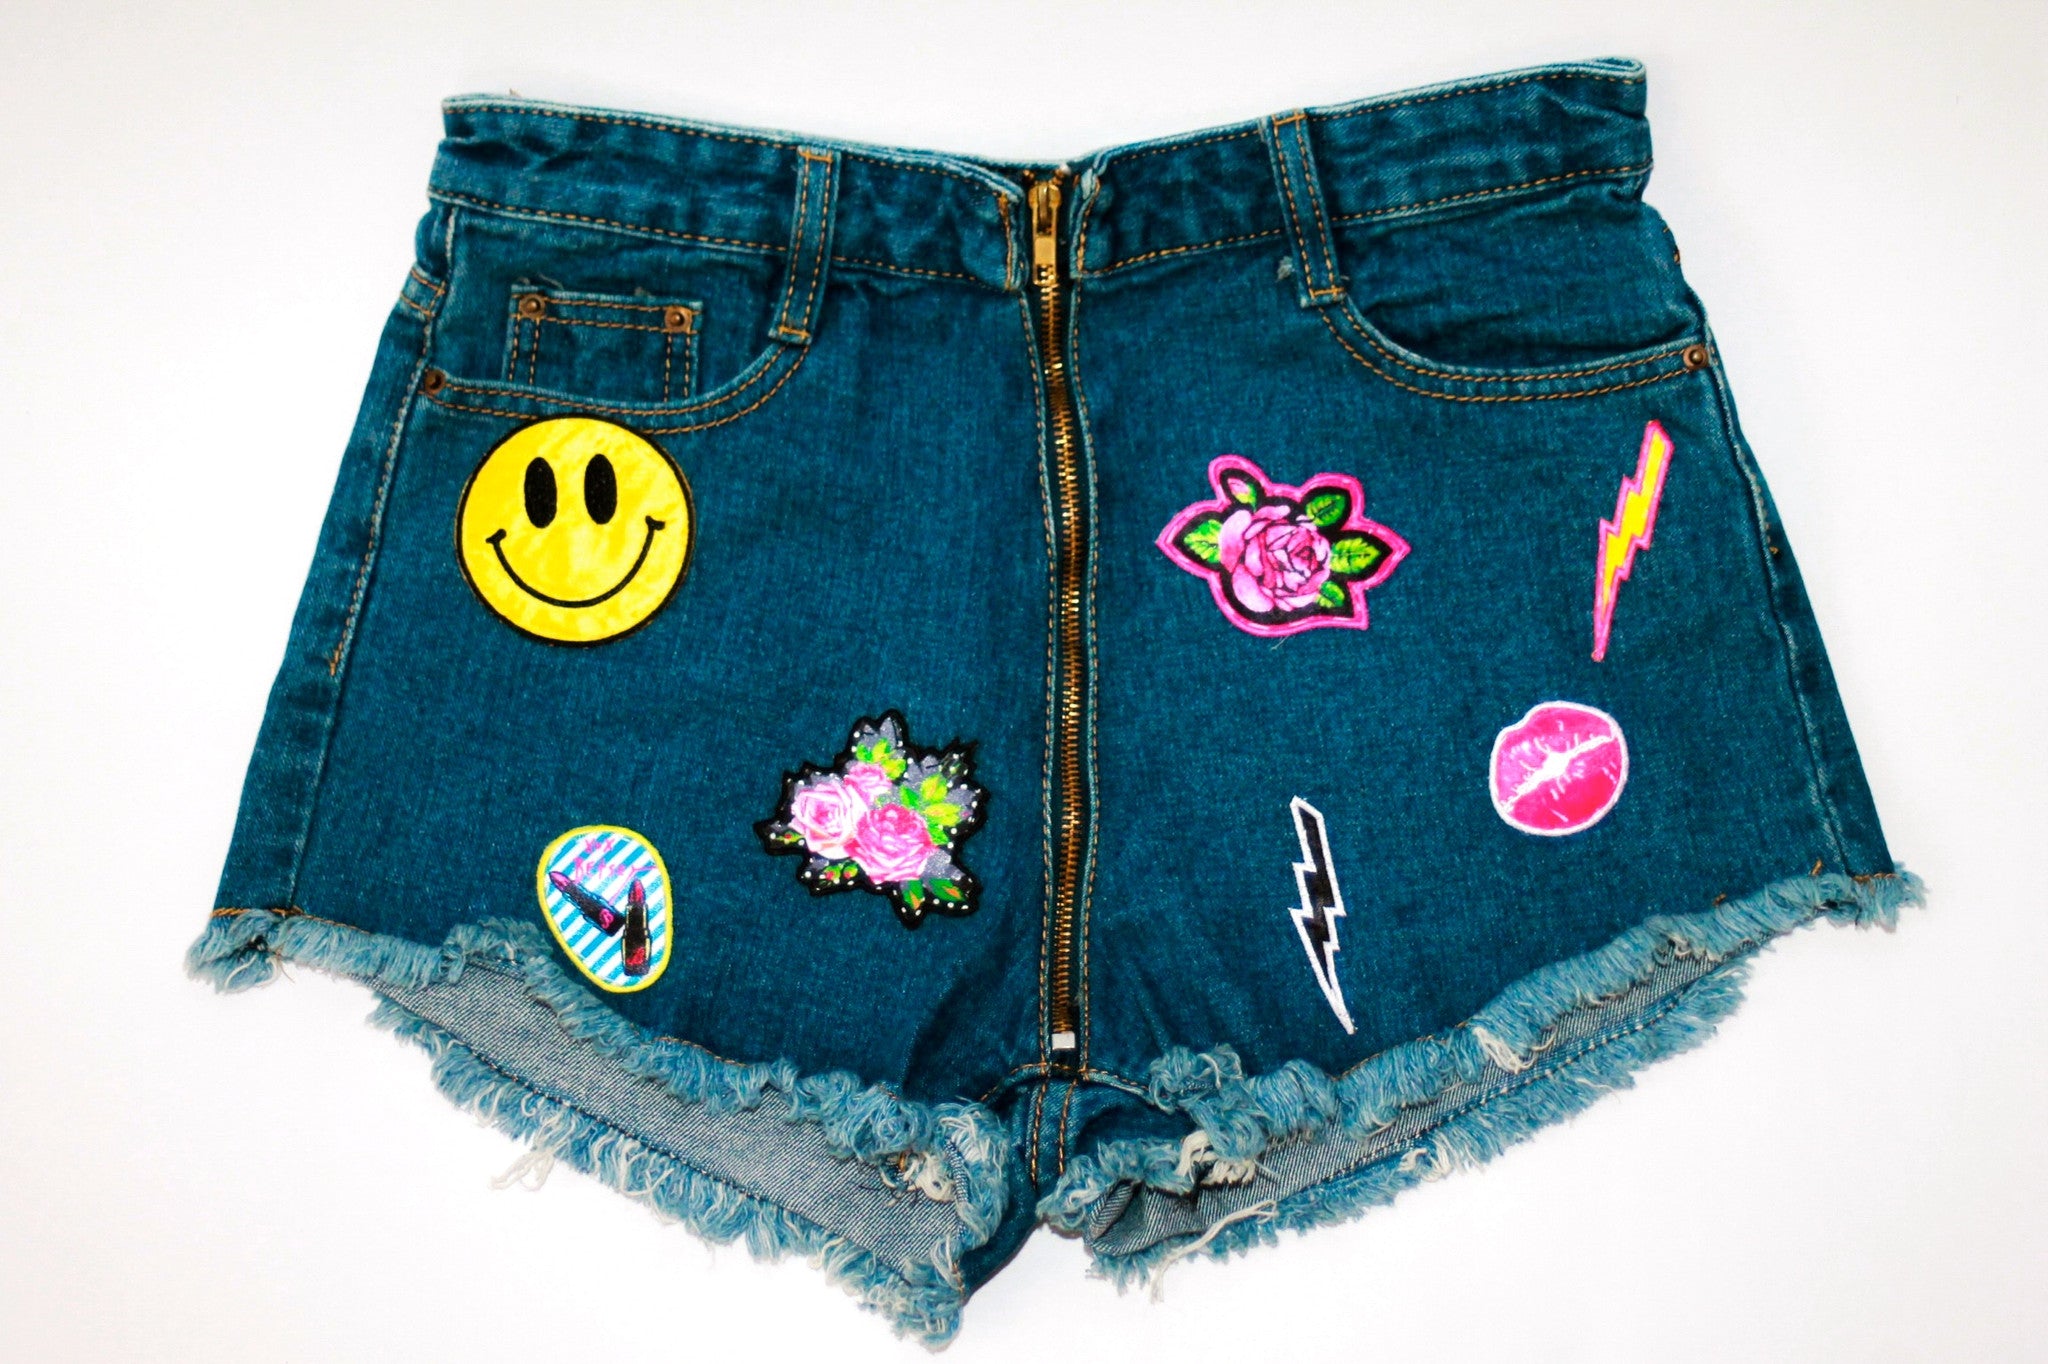 Custom 7ven x Betsey Johnson Patched Shorts #7